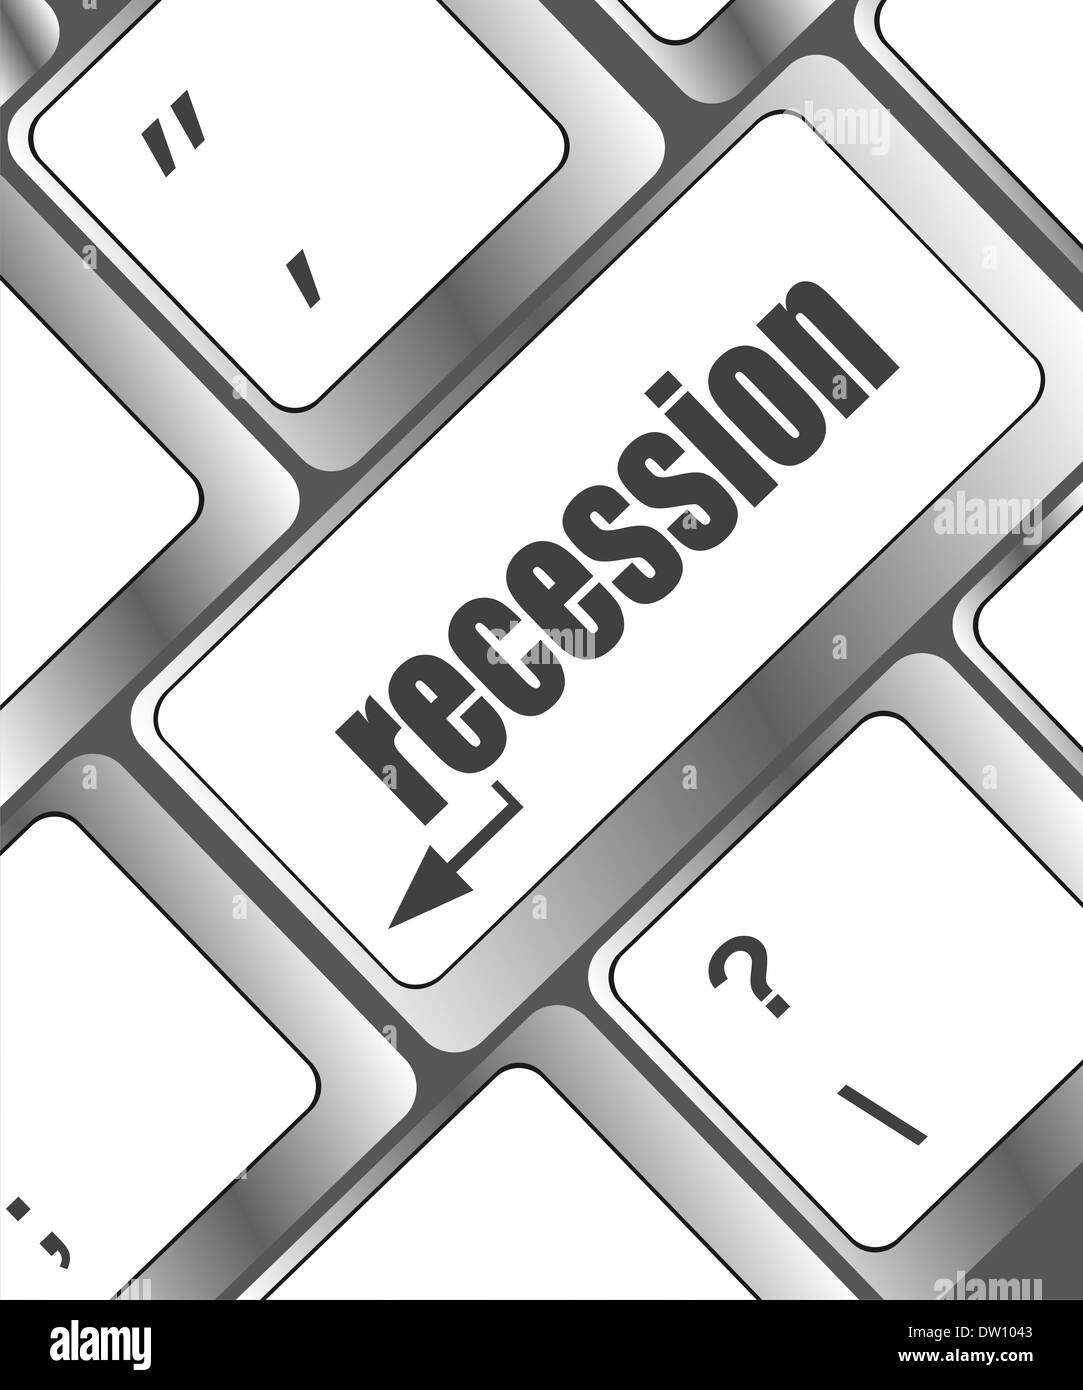 Wording recession on computer keyboard Stock Photo